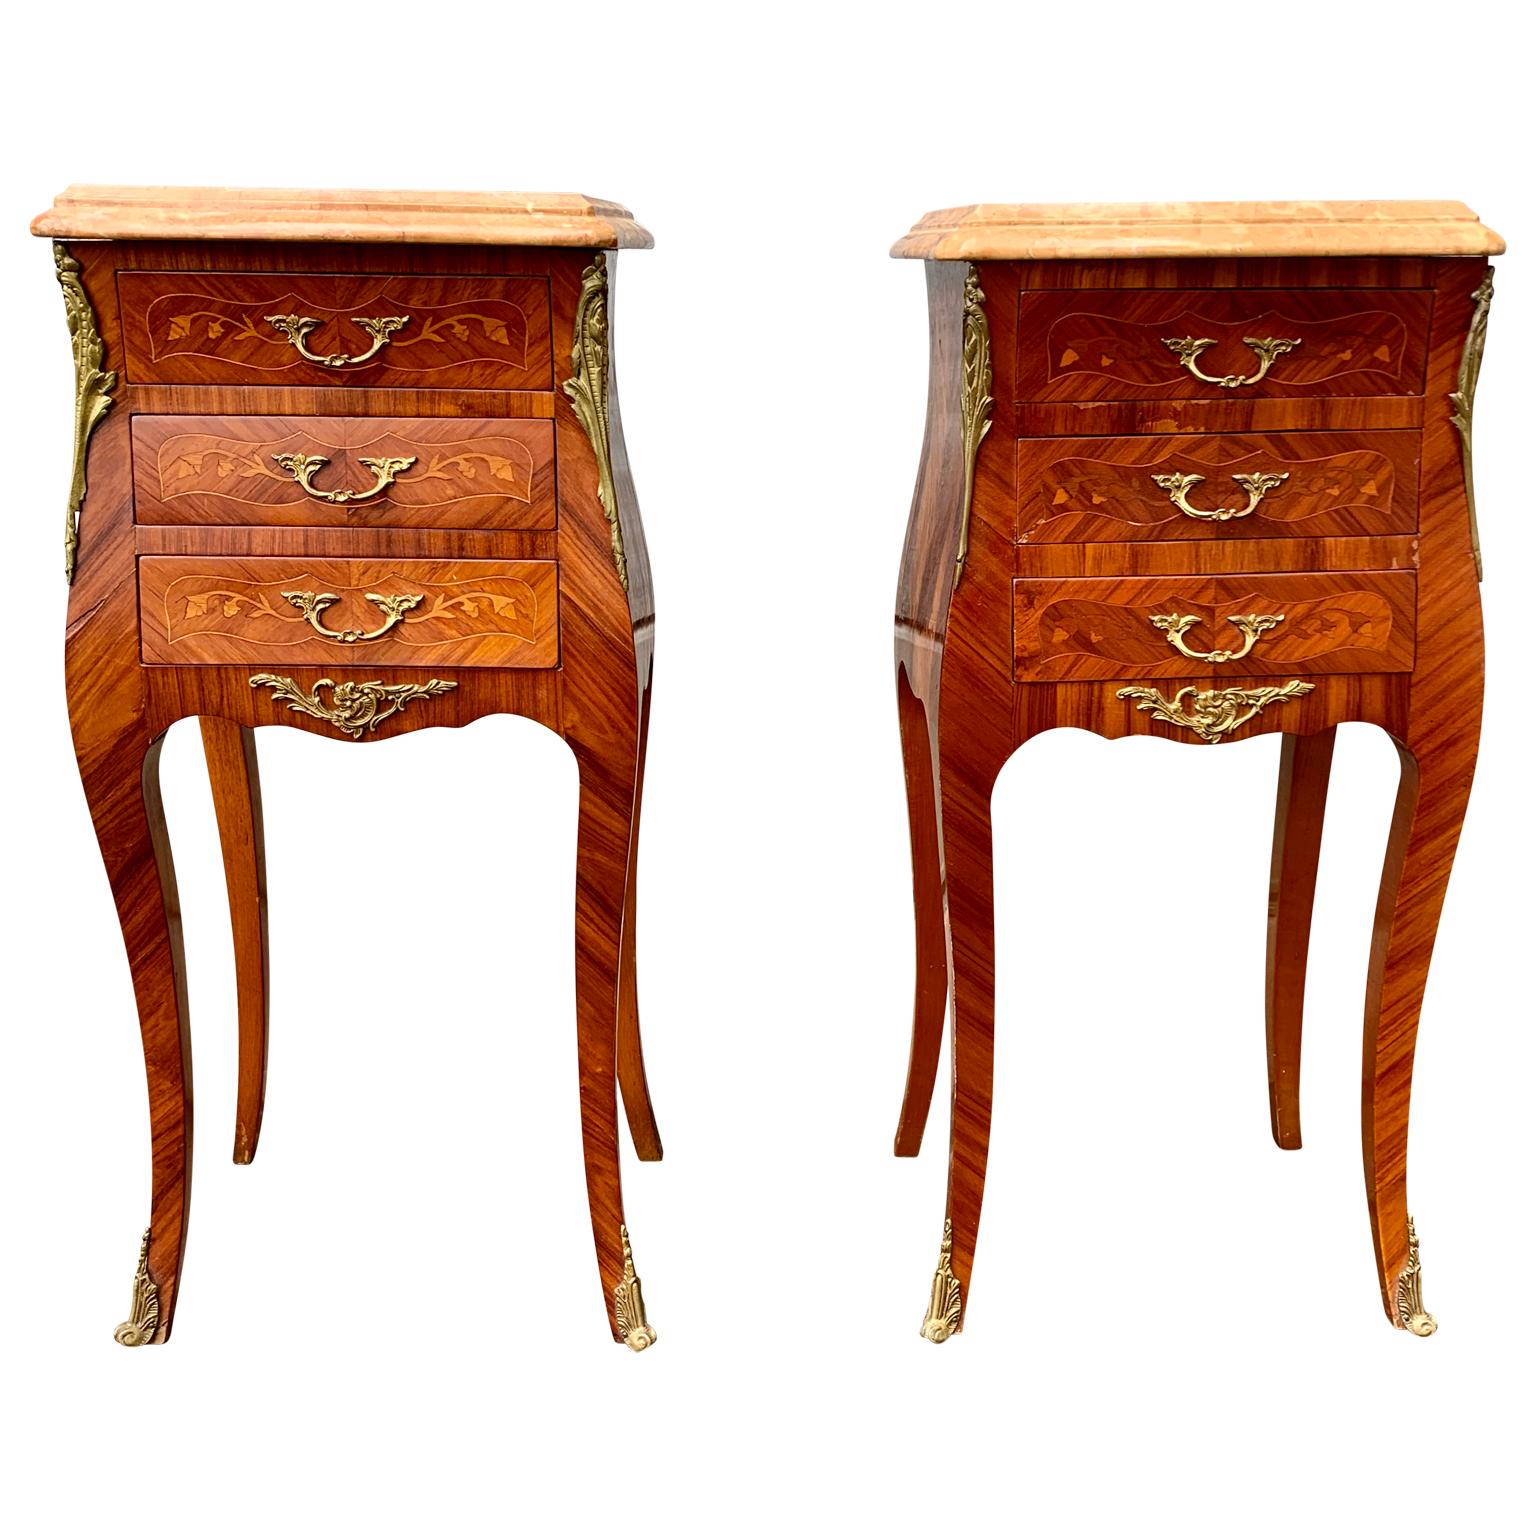 A pair of French bomb shaped nightstands or small chest of drawers in mahogany marquetry work and top in mottled pink marble.
This pair of small 3 drawers Rococo style bedside commodes with original brass handles and decorations are from the early